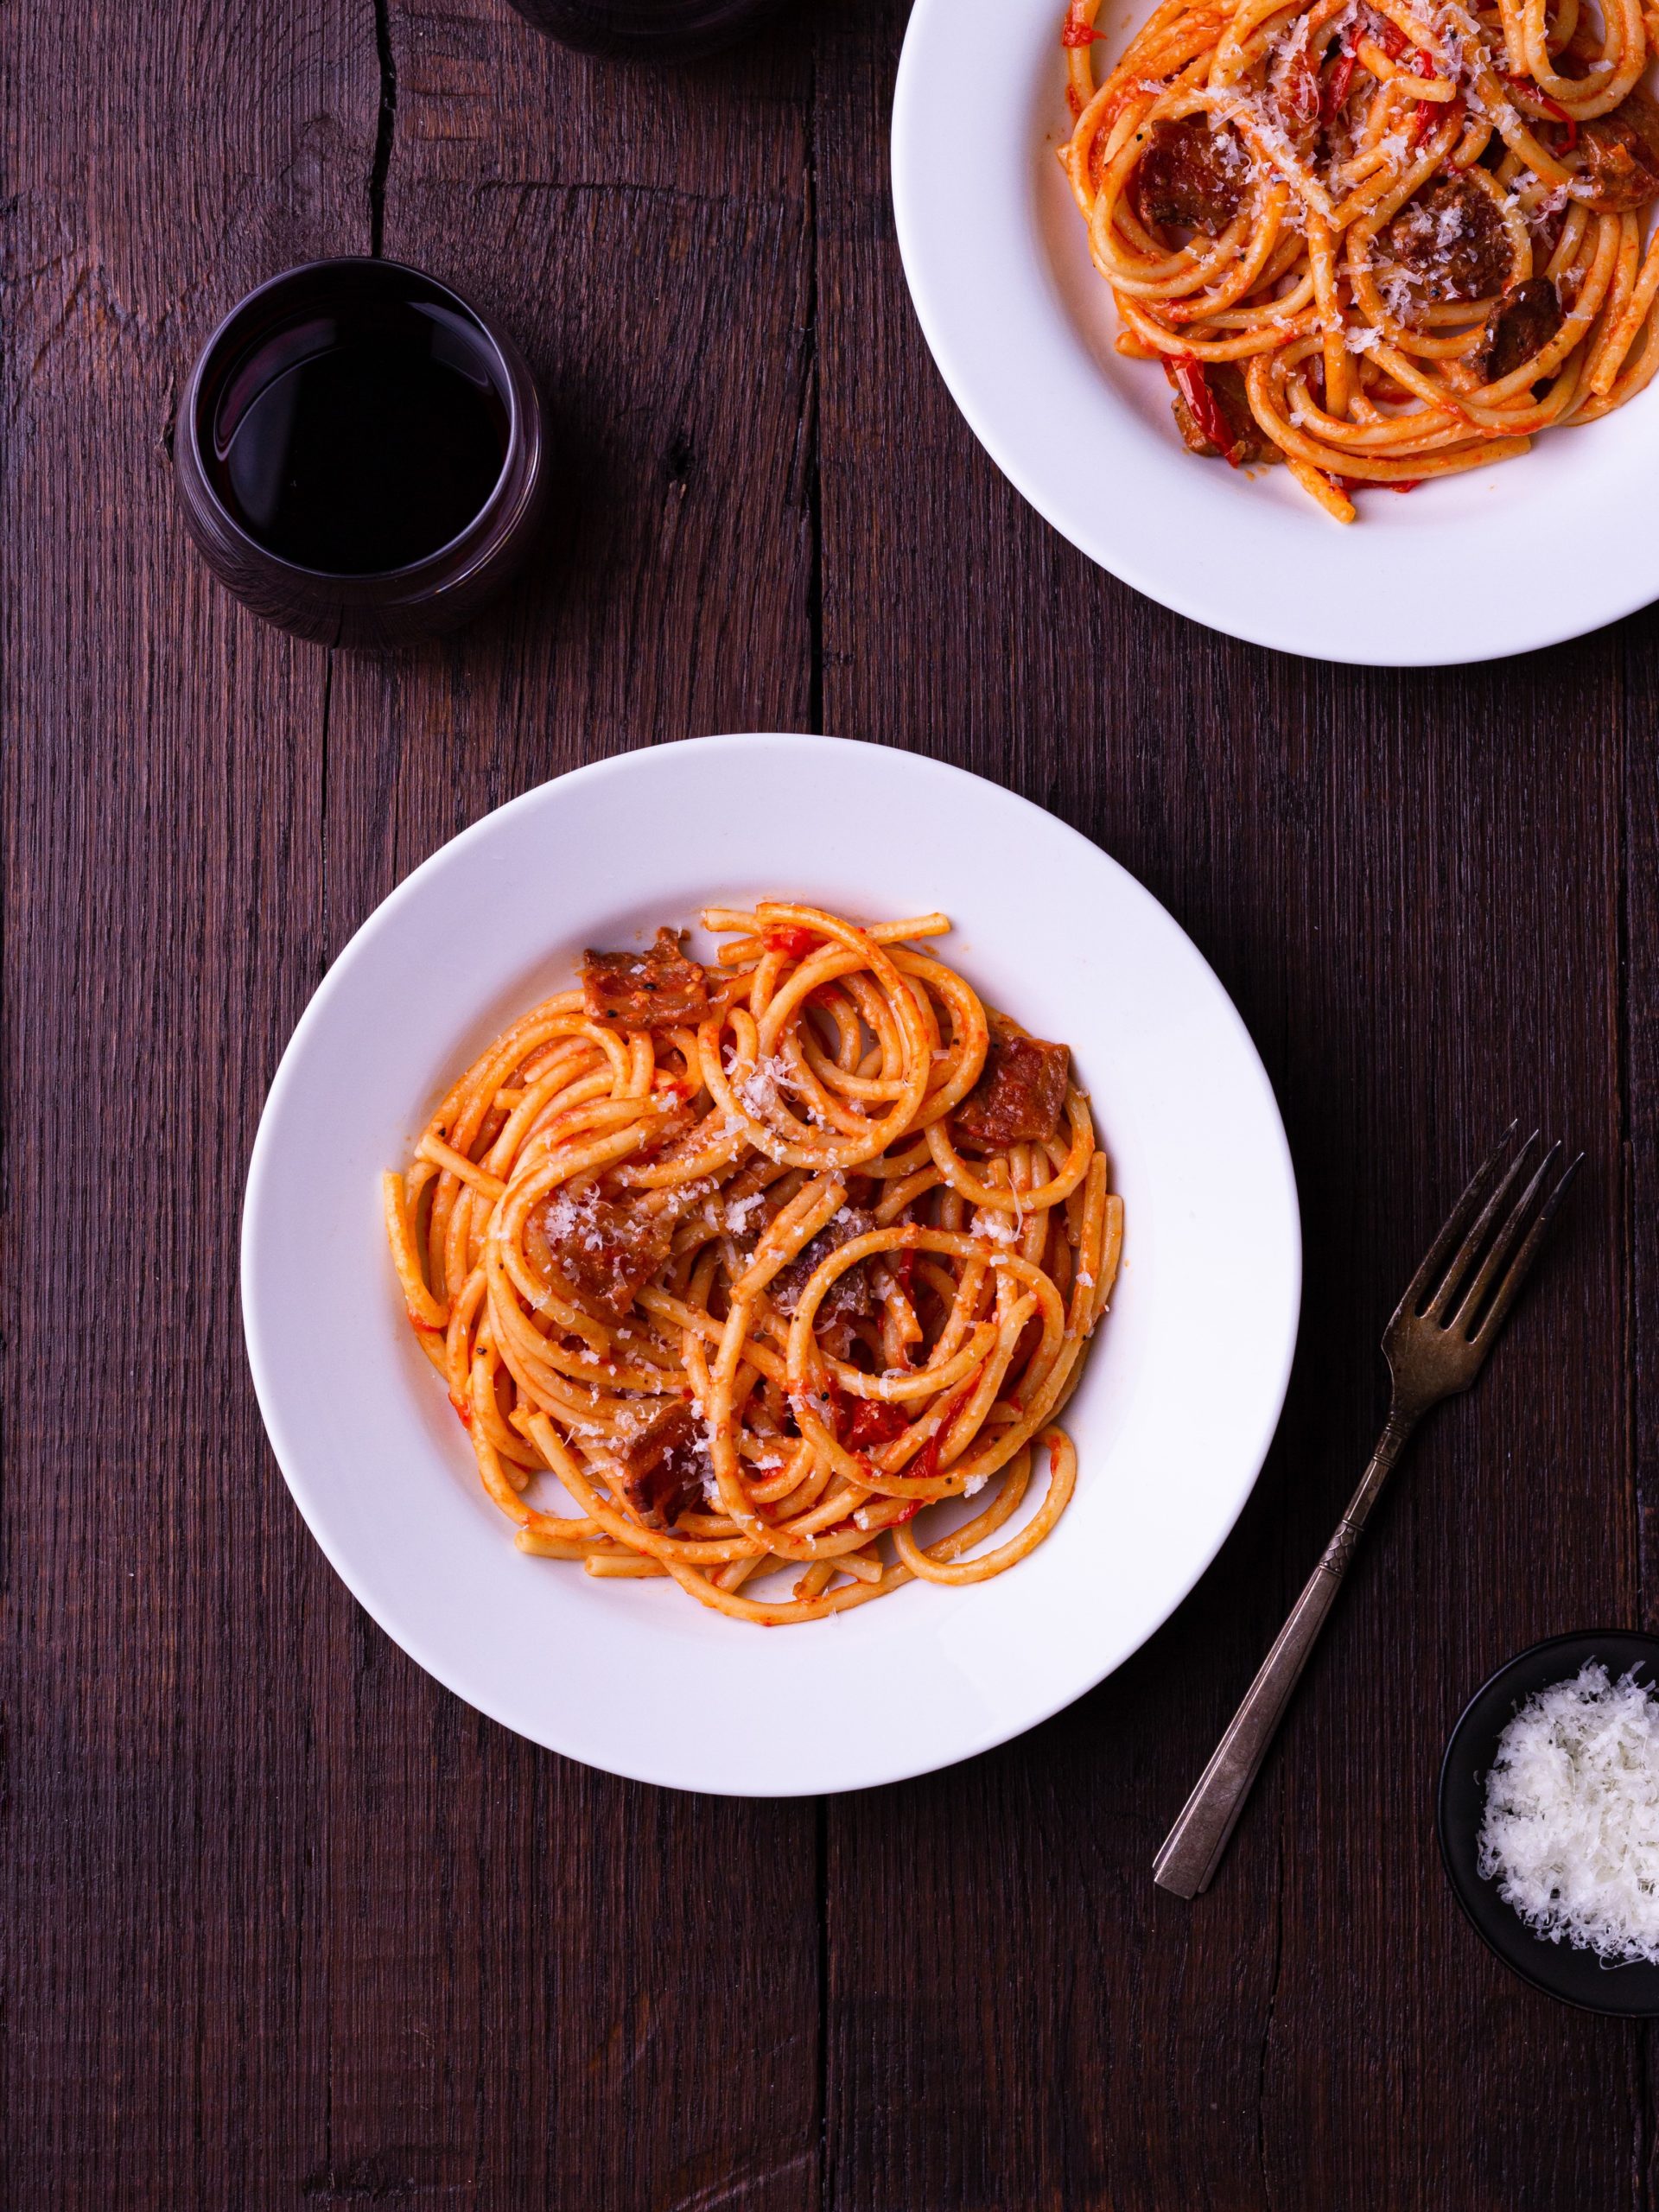 Two bowls of pasta with Amatriciana sauce topped with grated pecorino cheese, surrounded by glasses of red wine and a fork.